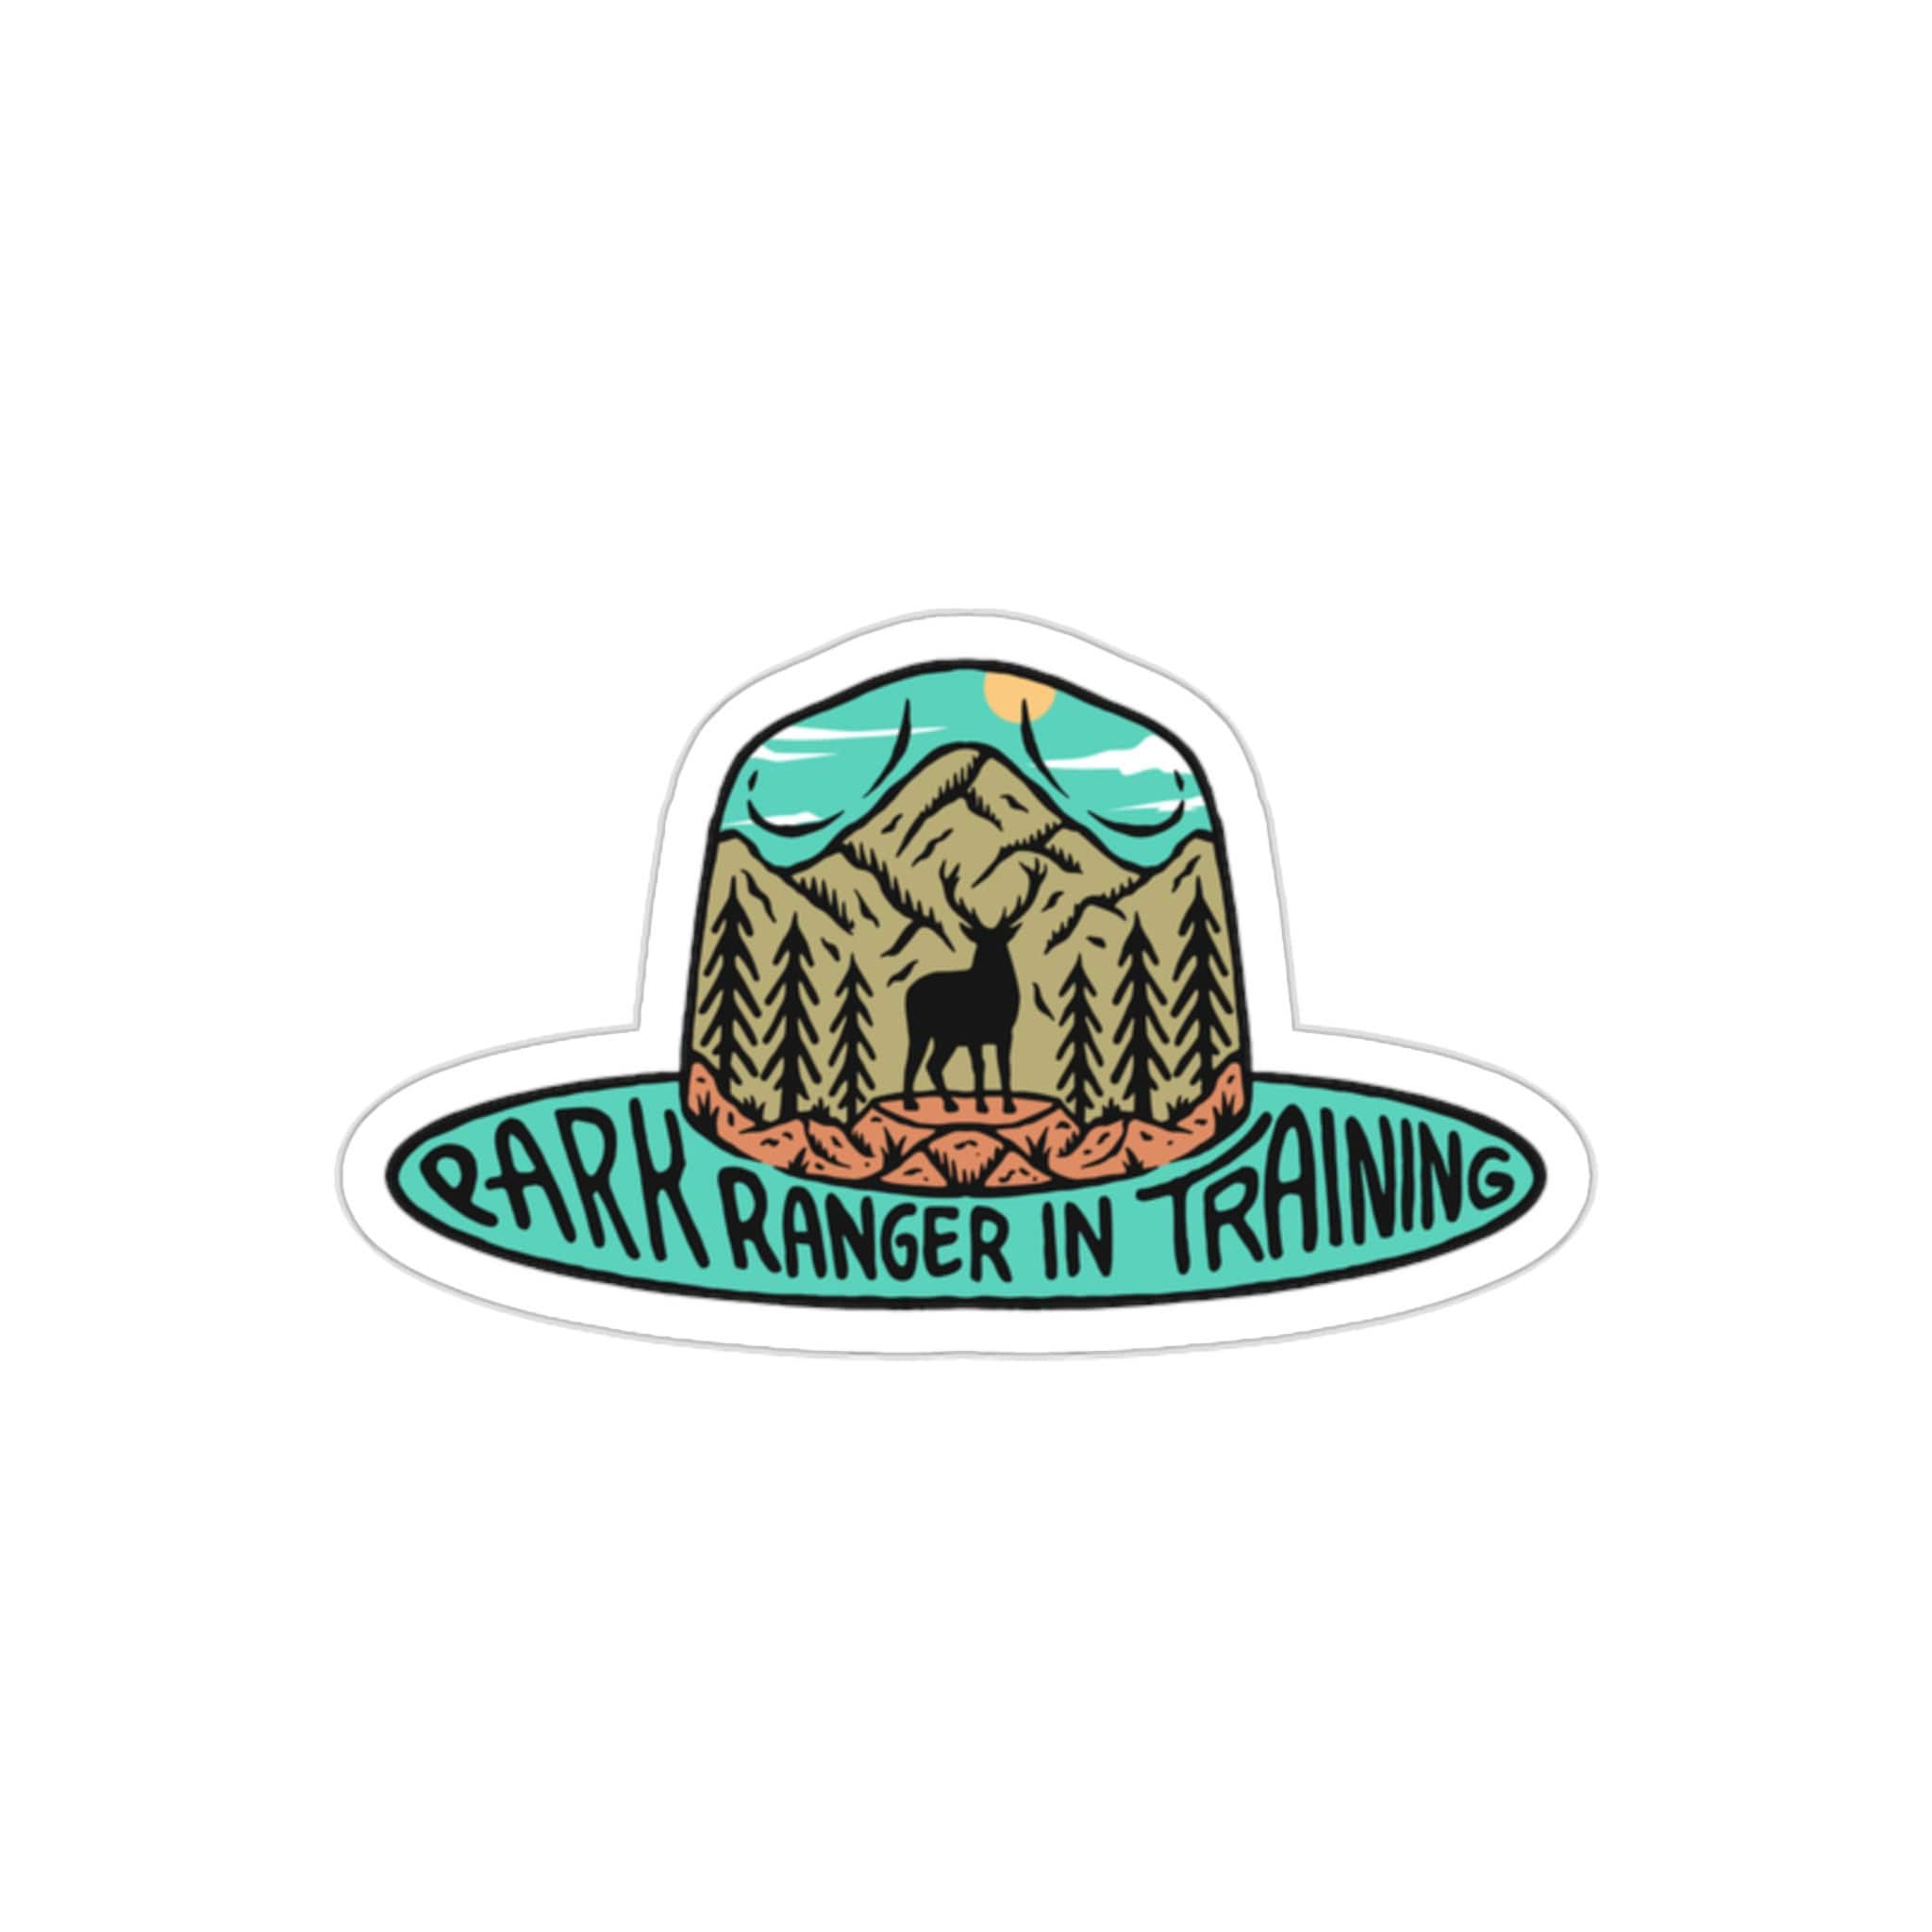 Park Ranger in Training National Park Vinyl Sticker Waterproof - Onyx Outfitters